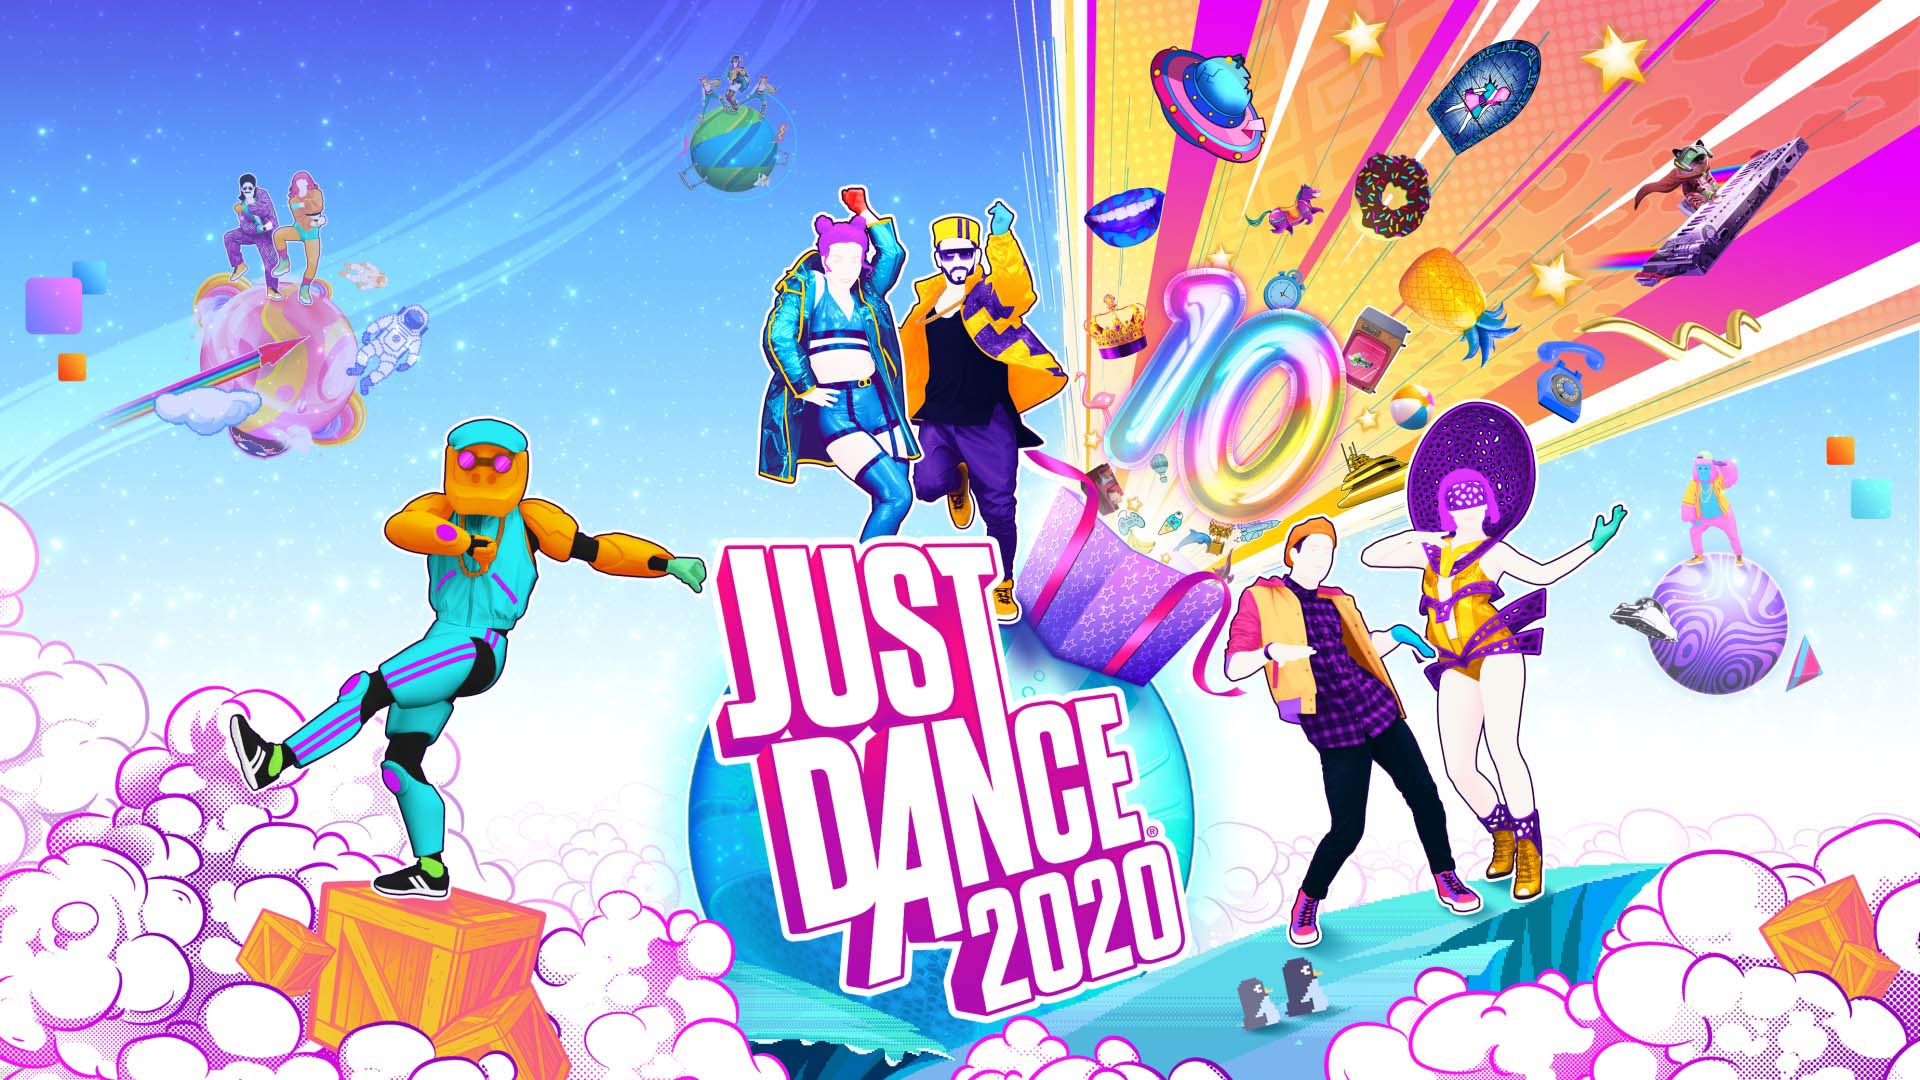 Análisis De Just Dance 2020 - final fantasty victory music roblox song id